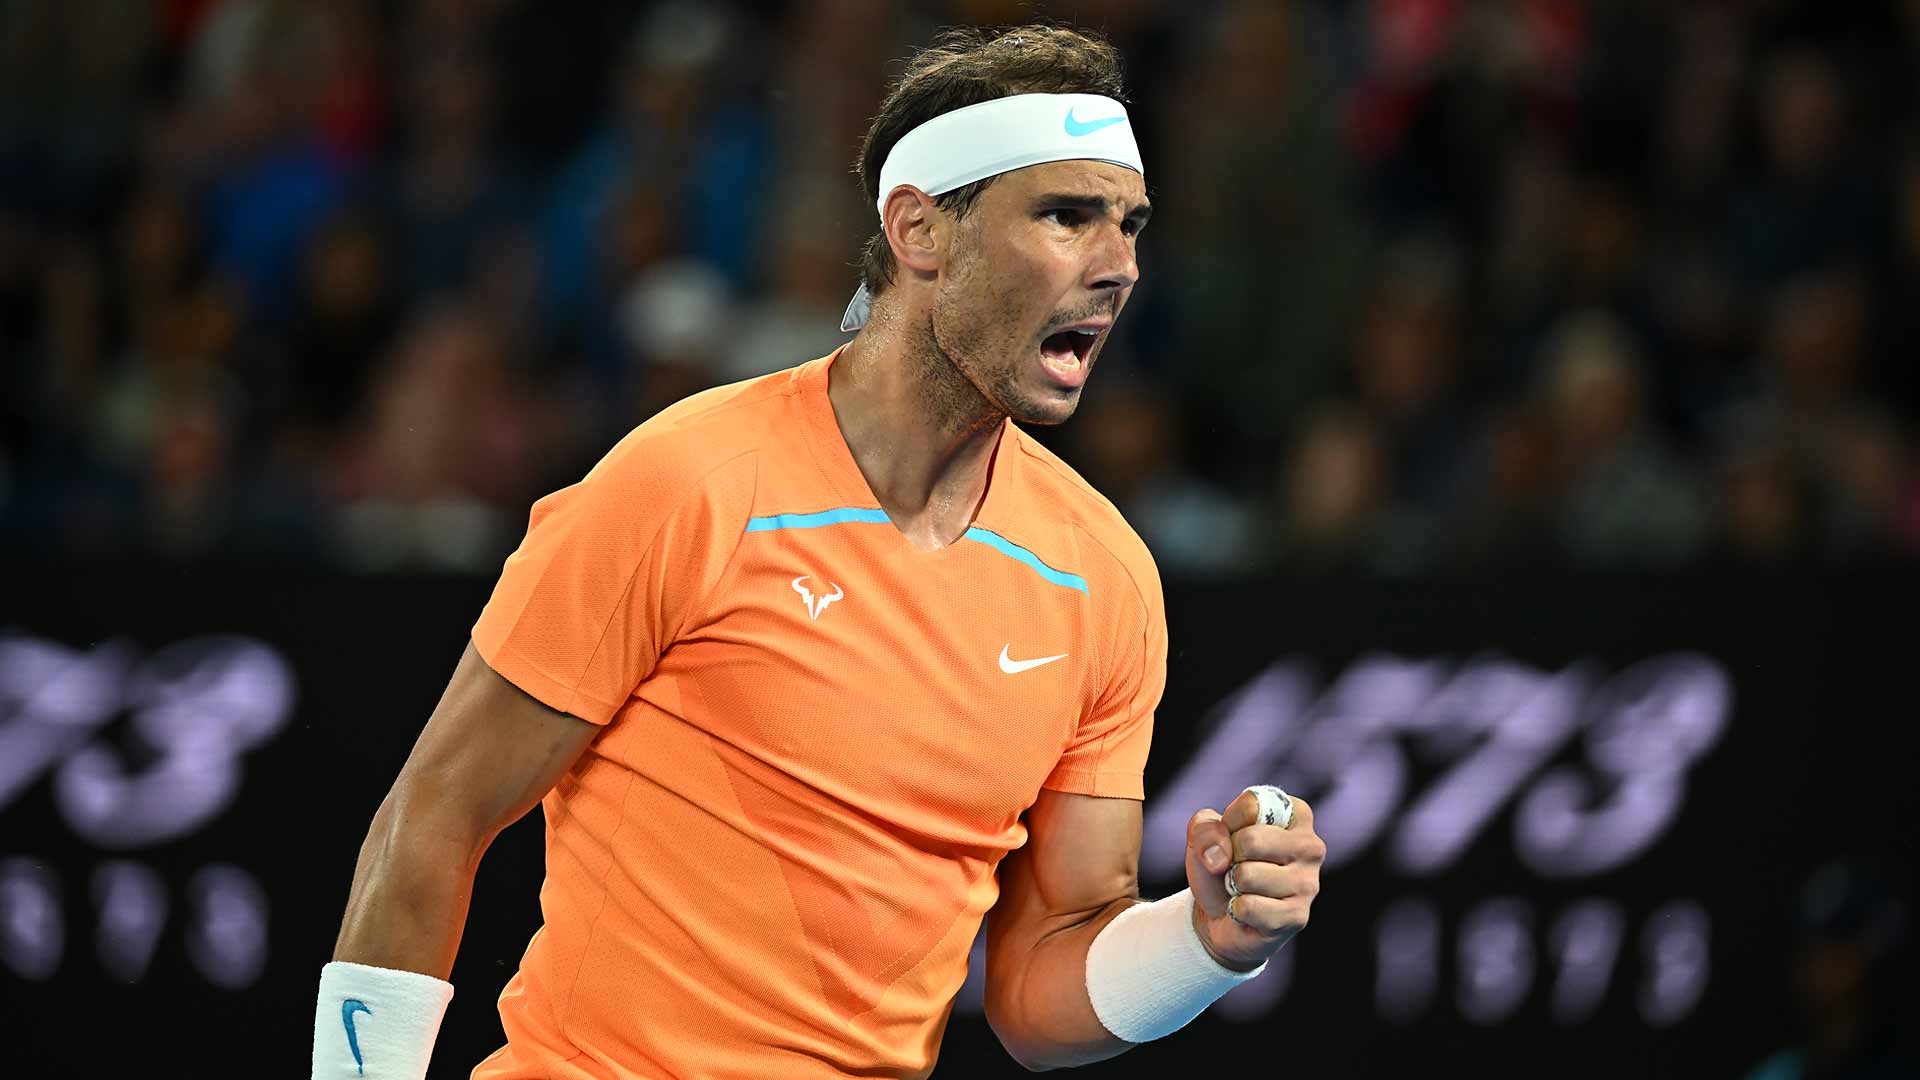 Rafael Nadal last competed in January at the 2023 Australian Open.